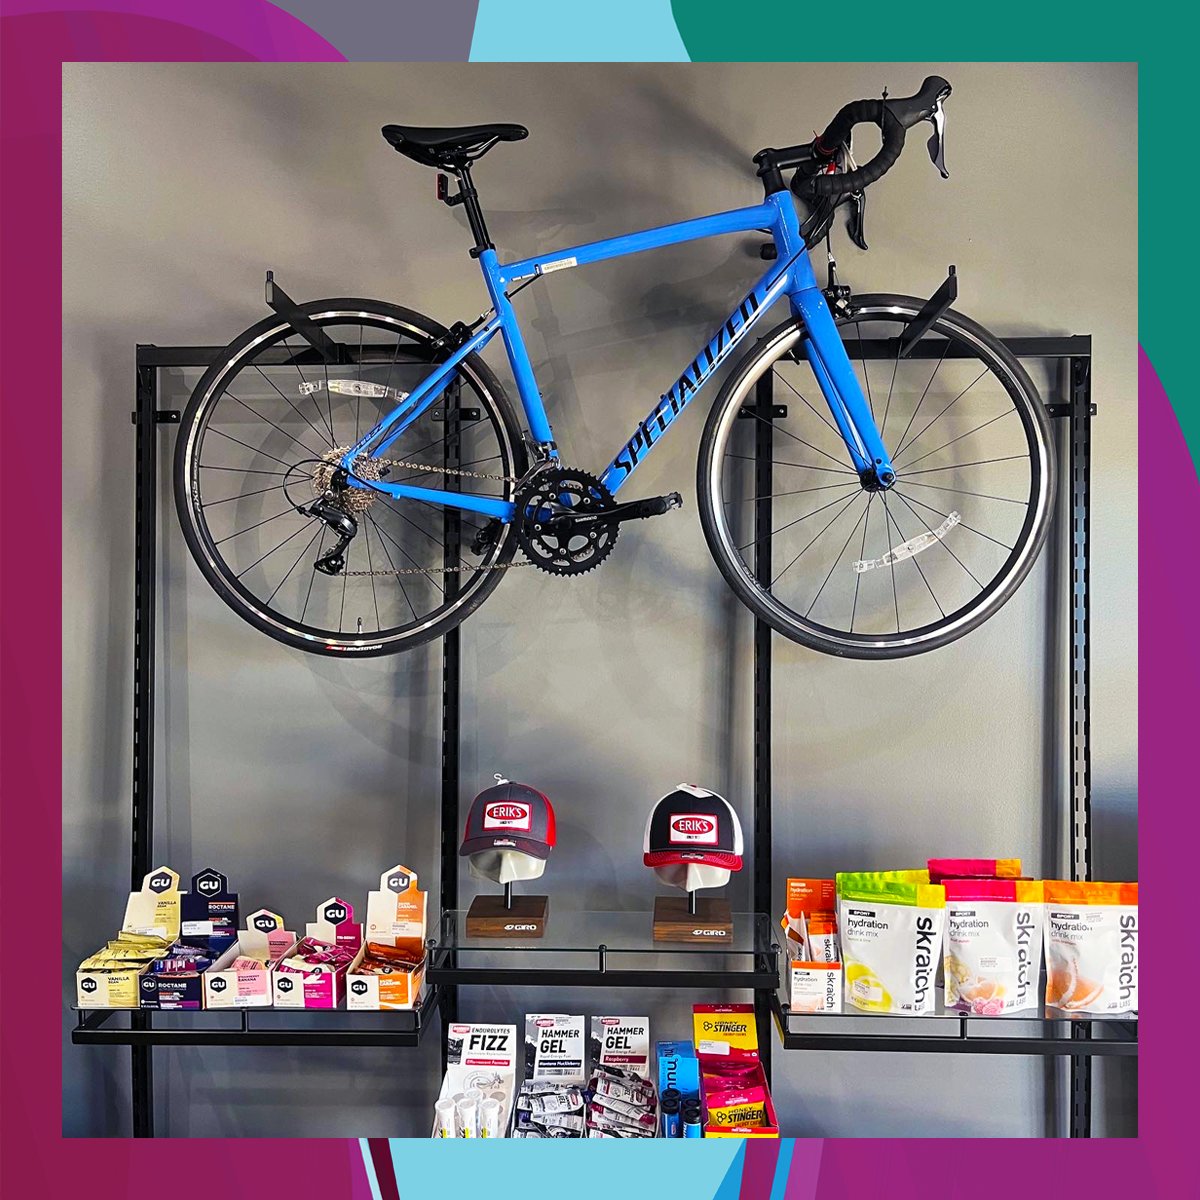 Get in motion this summer with a new bike from Erik's or stop in for a tune-up! Ride ready today and make the most of summer! #thebayshorelife #summerfun